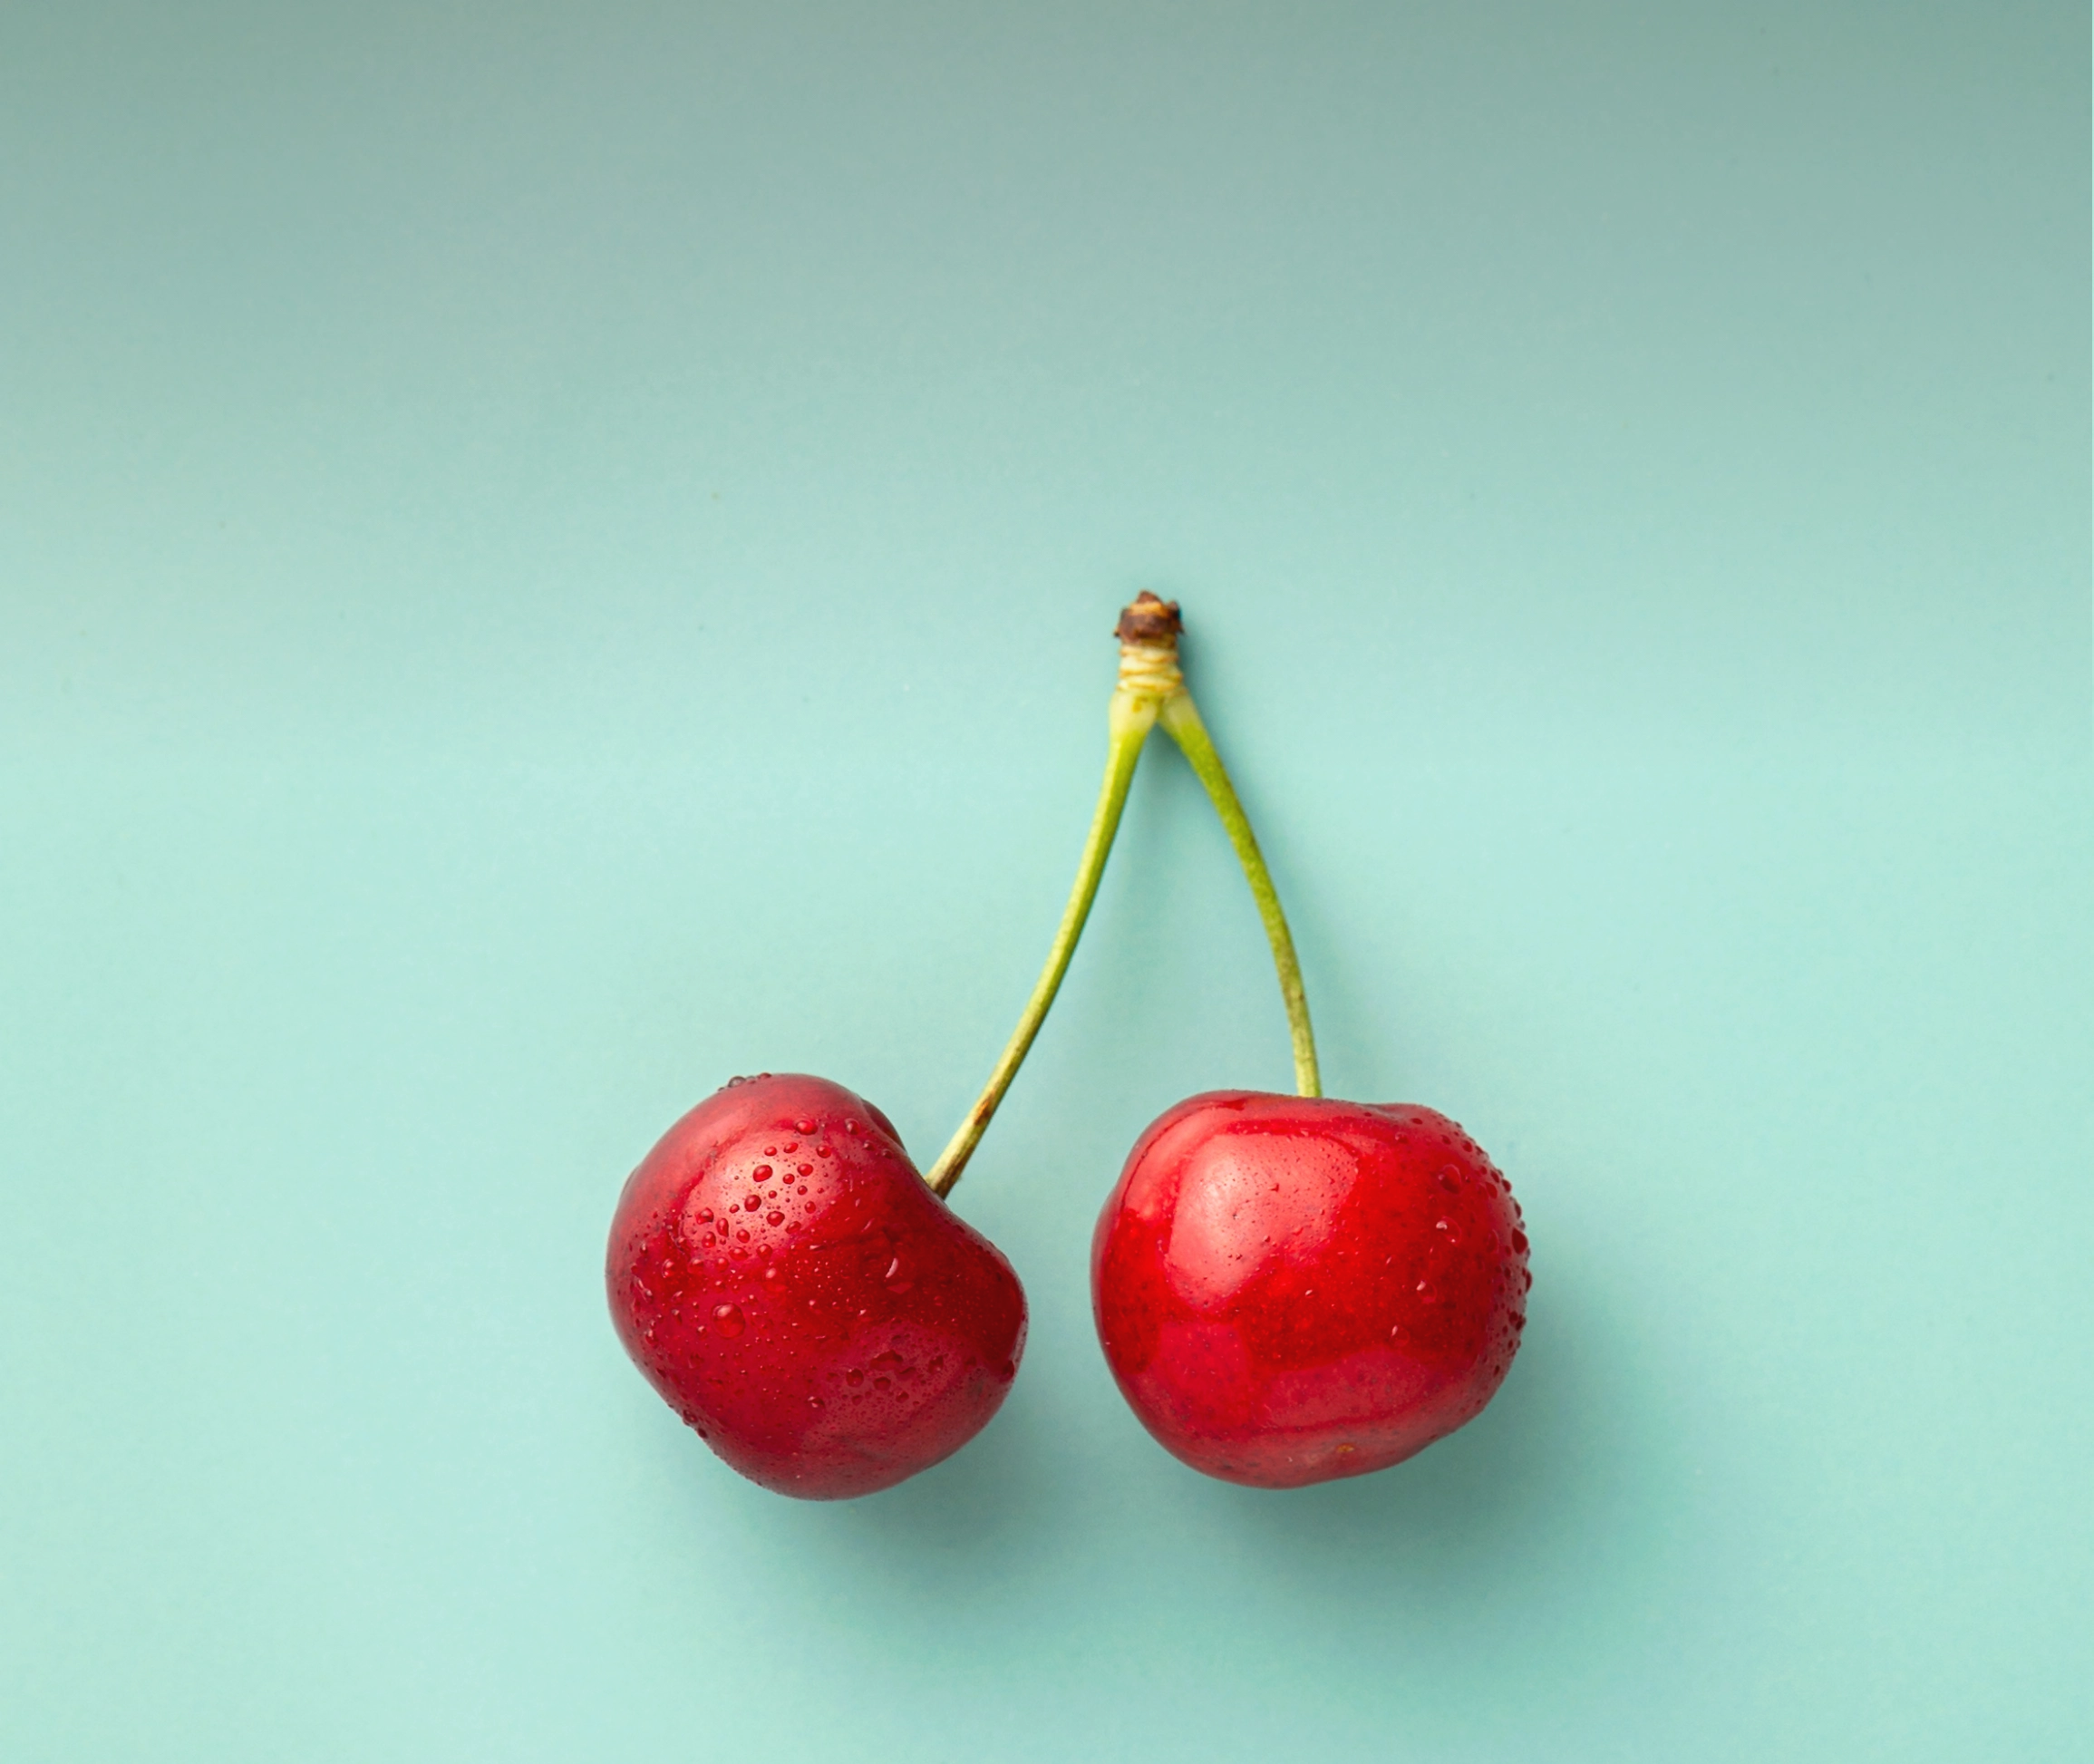 a pair of cherries on a blue background